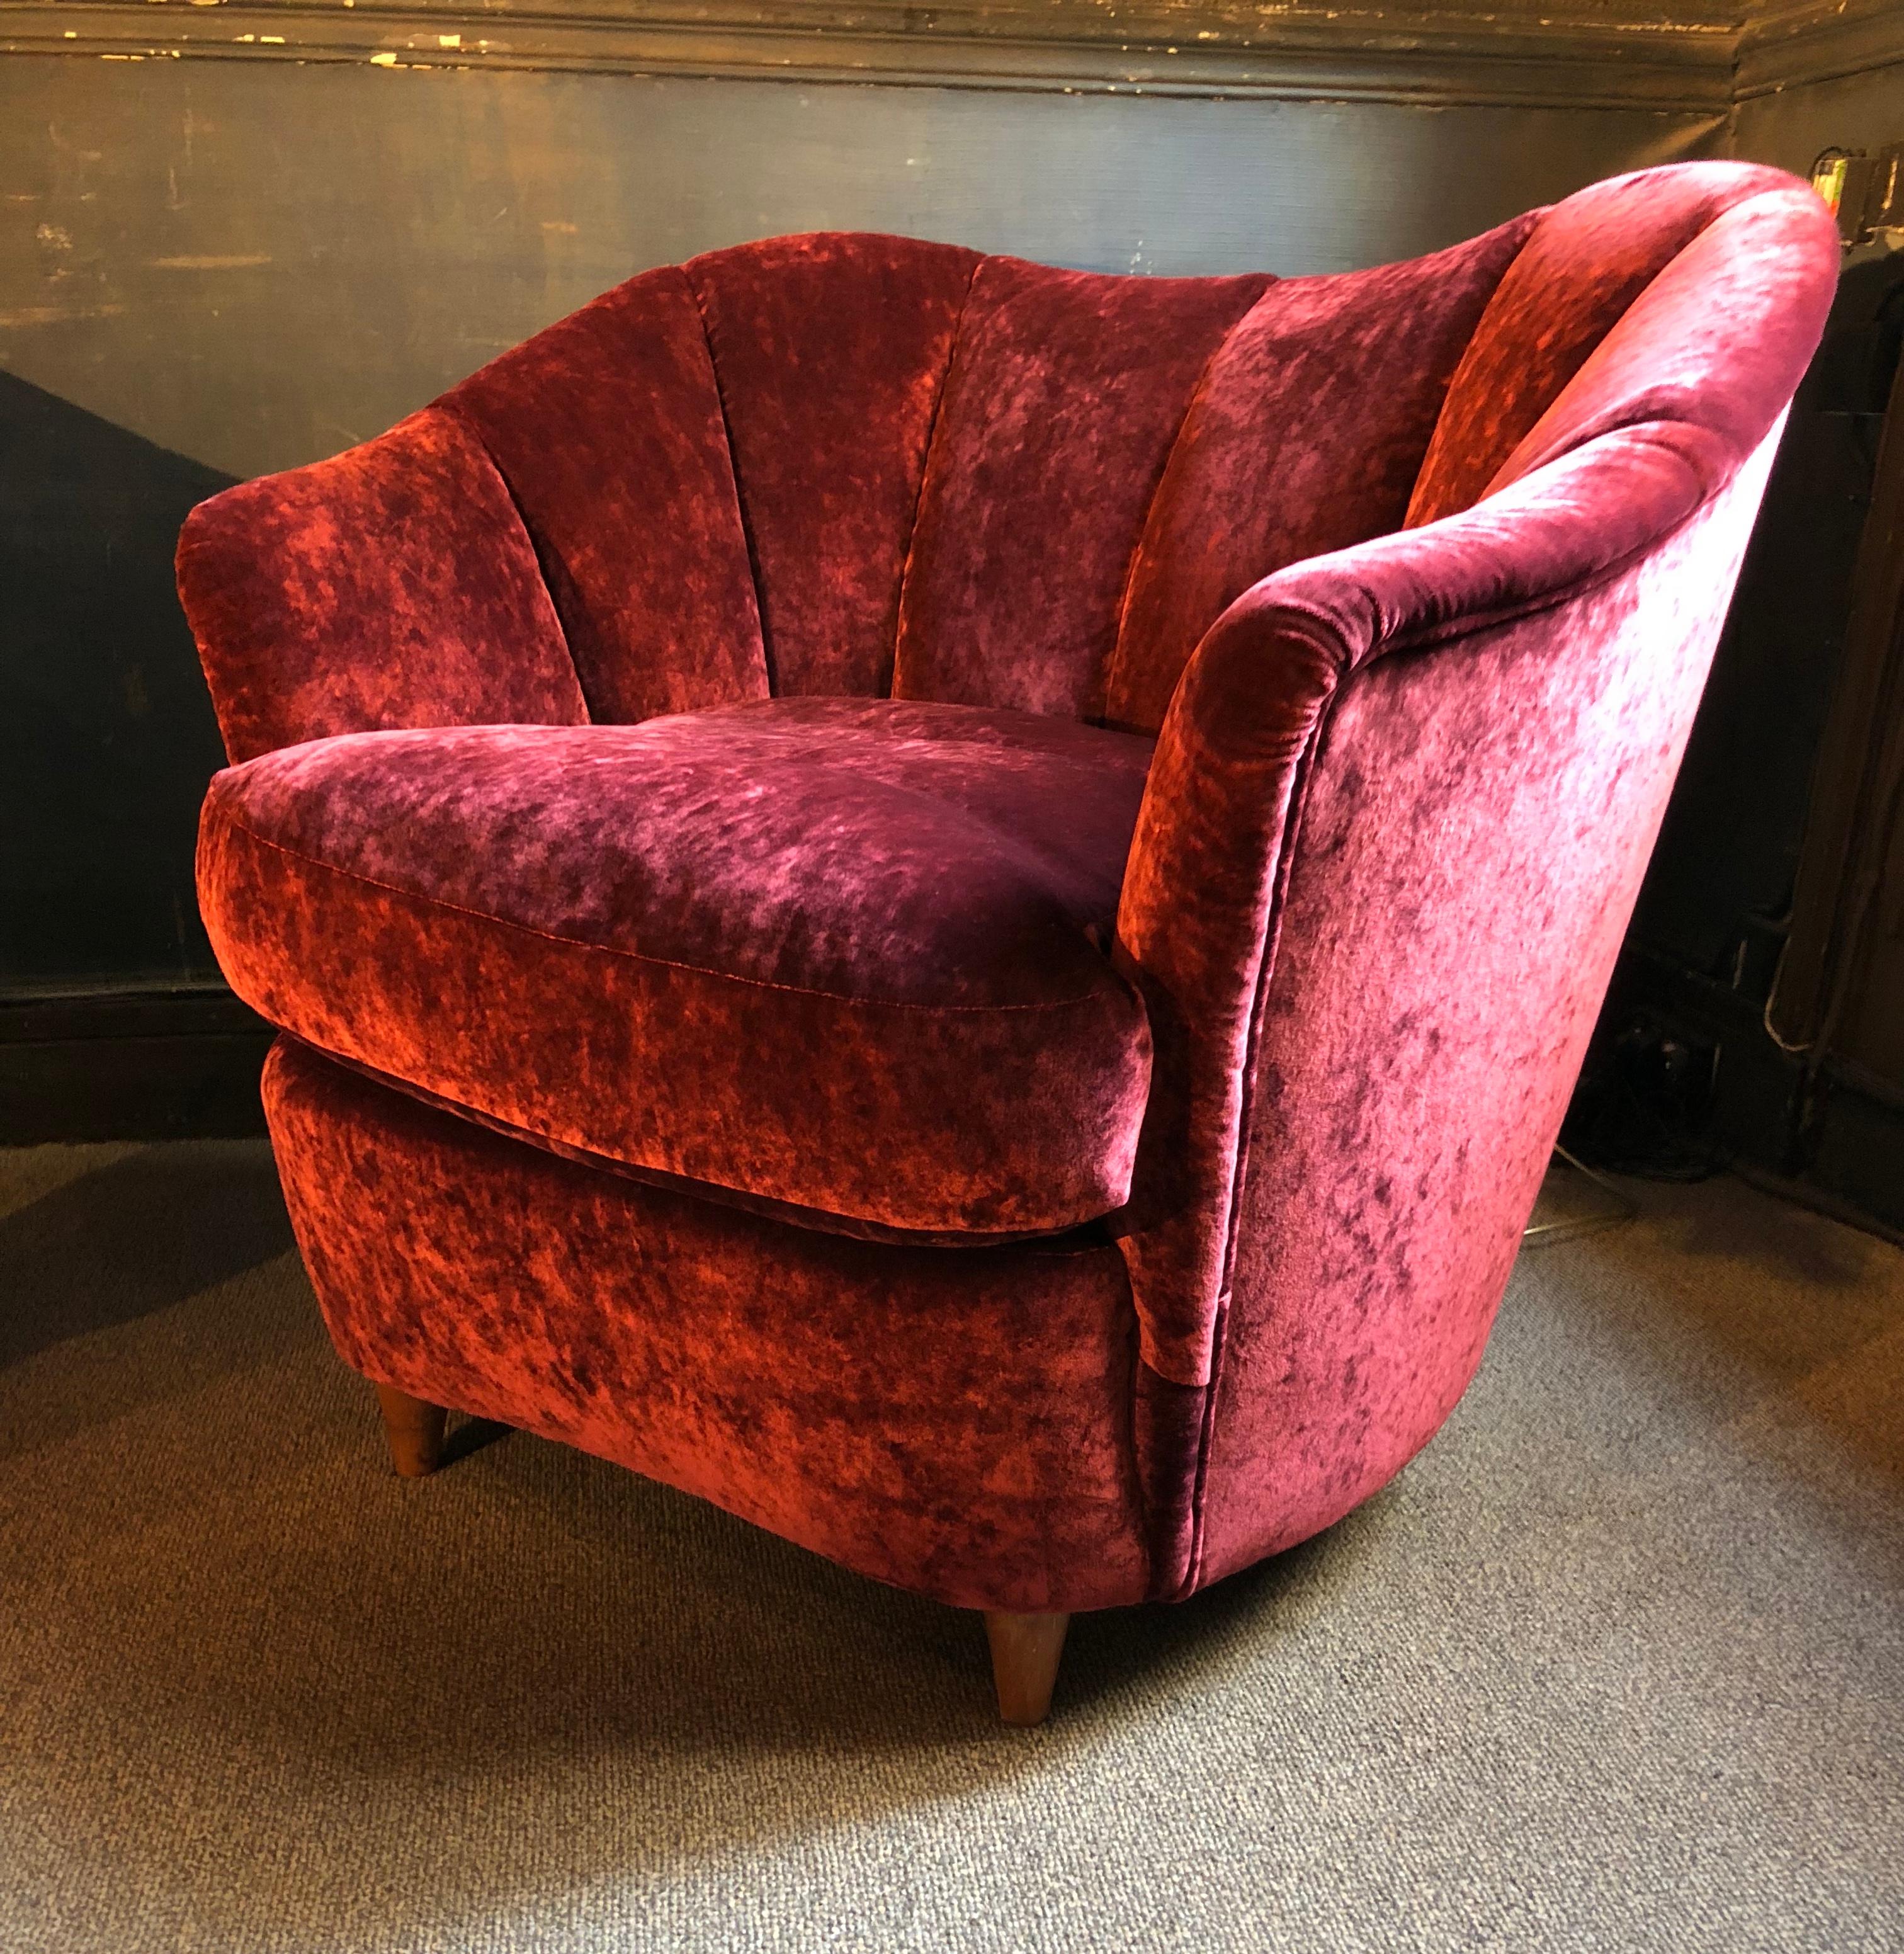 Pair of shell-shaped armchairs re-upholstered in deep red moiré velvet
wooden legs
circa 1940
Italy.